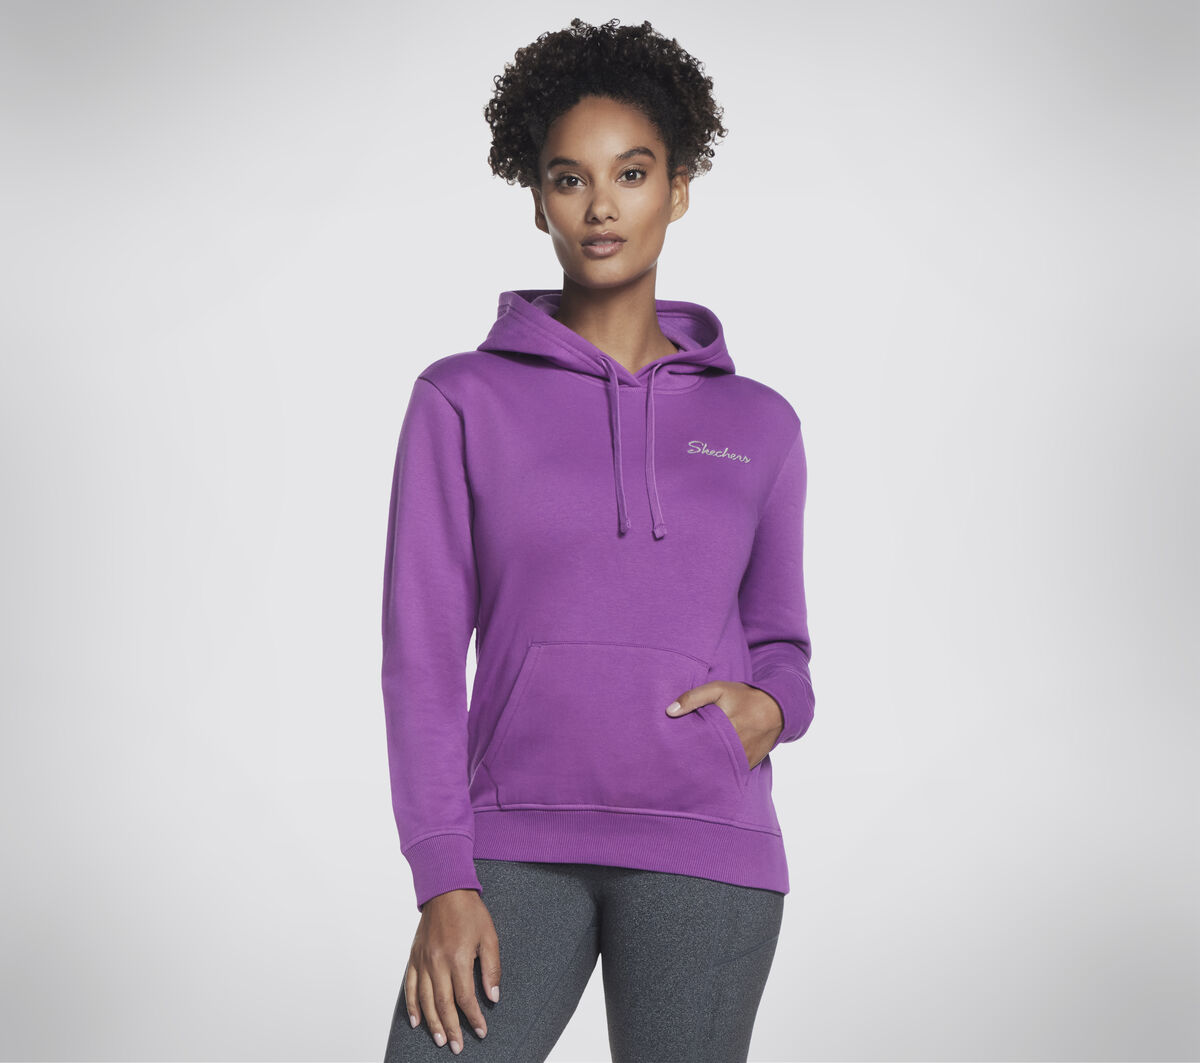 Shop the Skechers Signature Pullover Hoodie